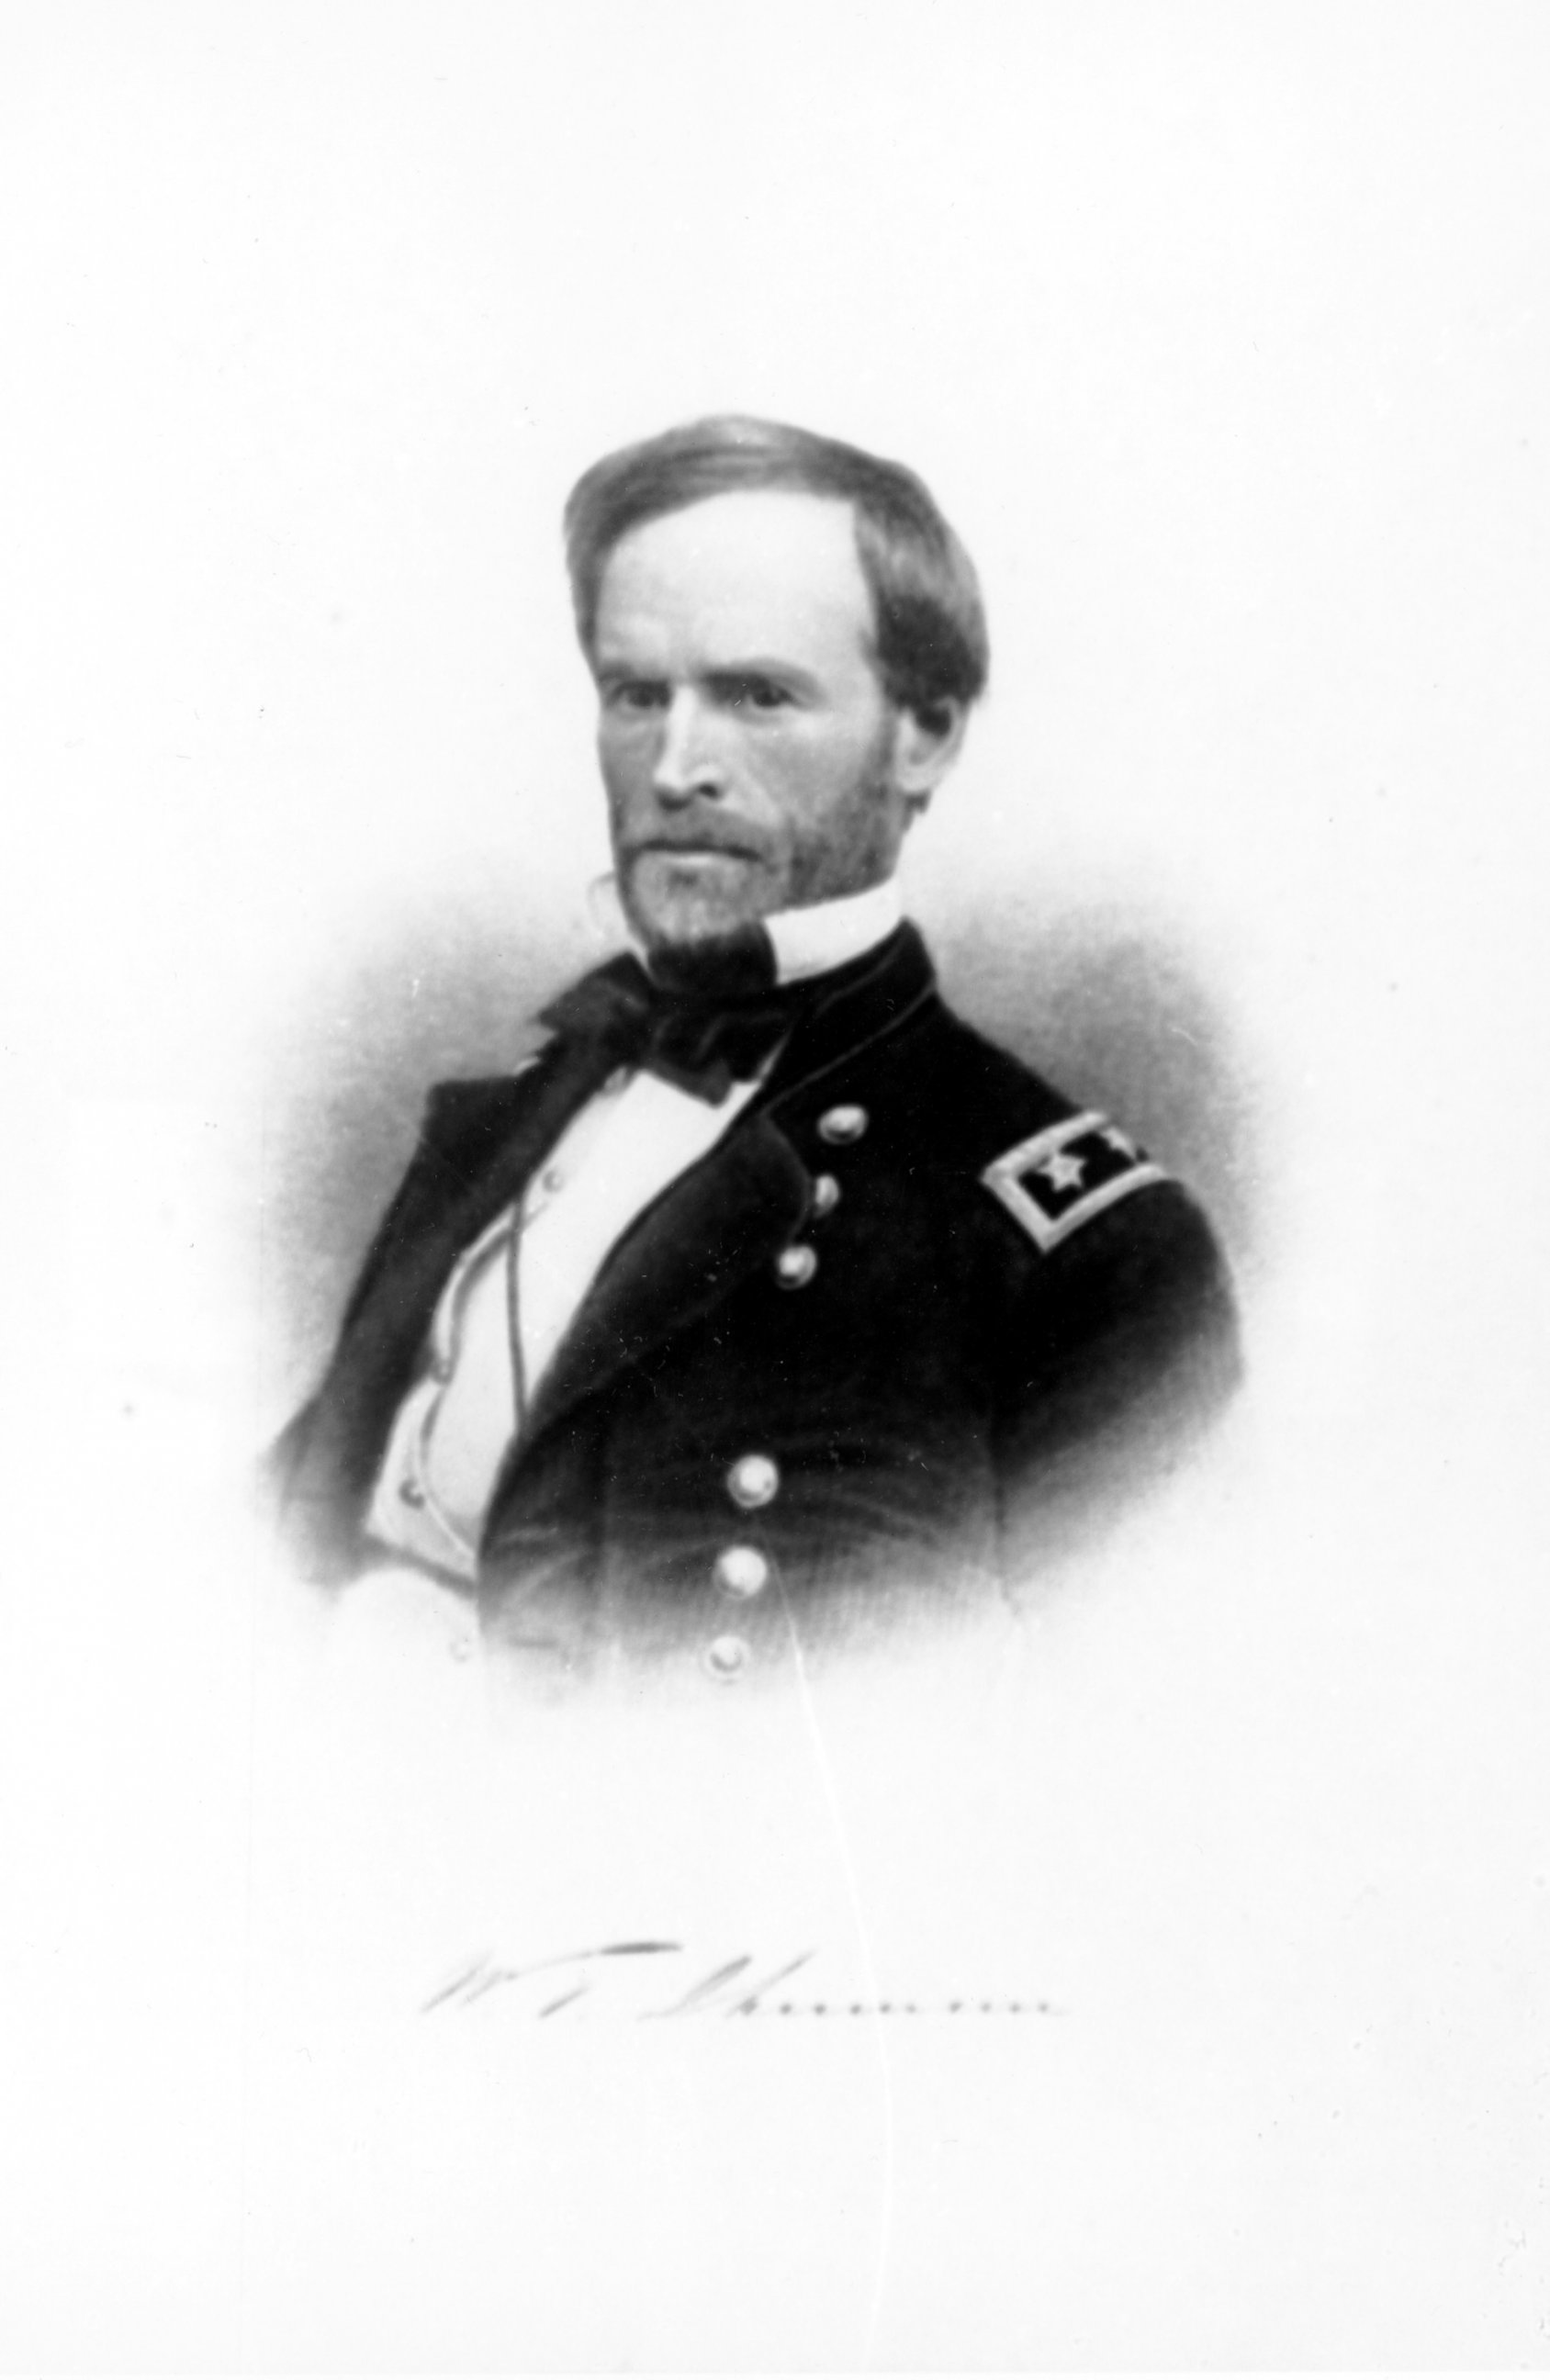 PHOTO: This is an undated photo of Gen. William Tecumseh Sherman. He became general of the Union army during the American Civil War. 